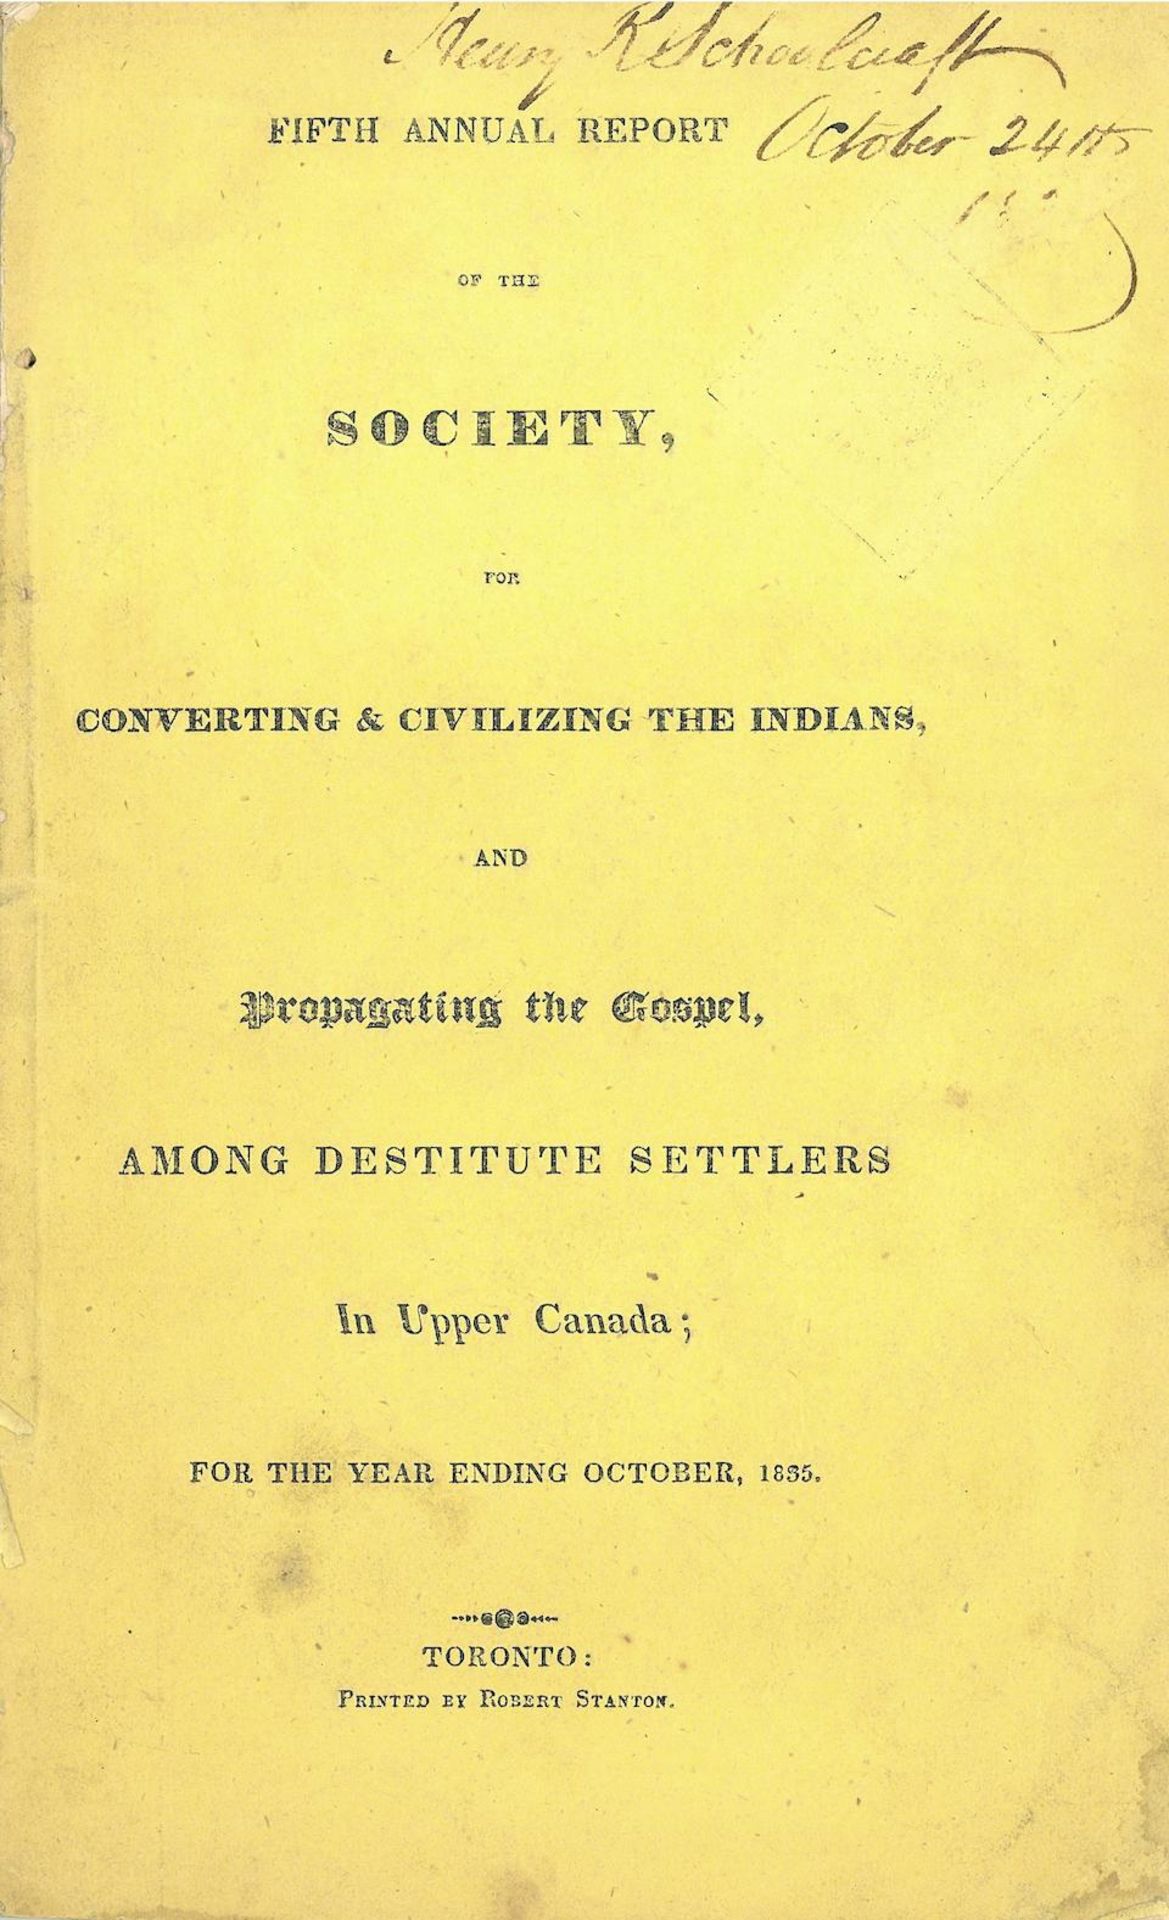 SCHOOLCRAFT, HENRY ROWE. 1793-1864. Fifth Annual Report of the Society, for Converting & Civiliz...